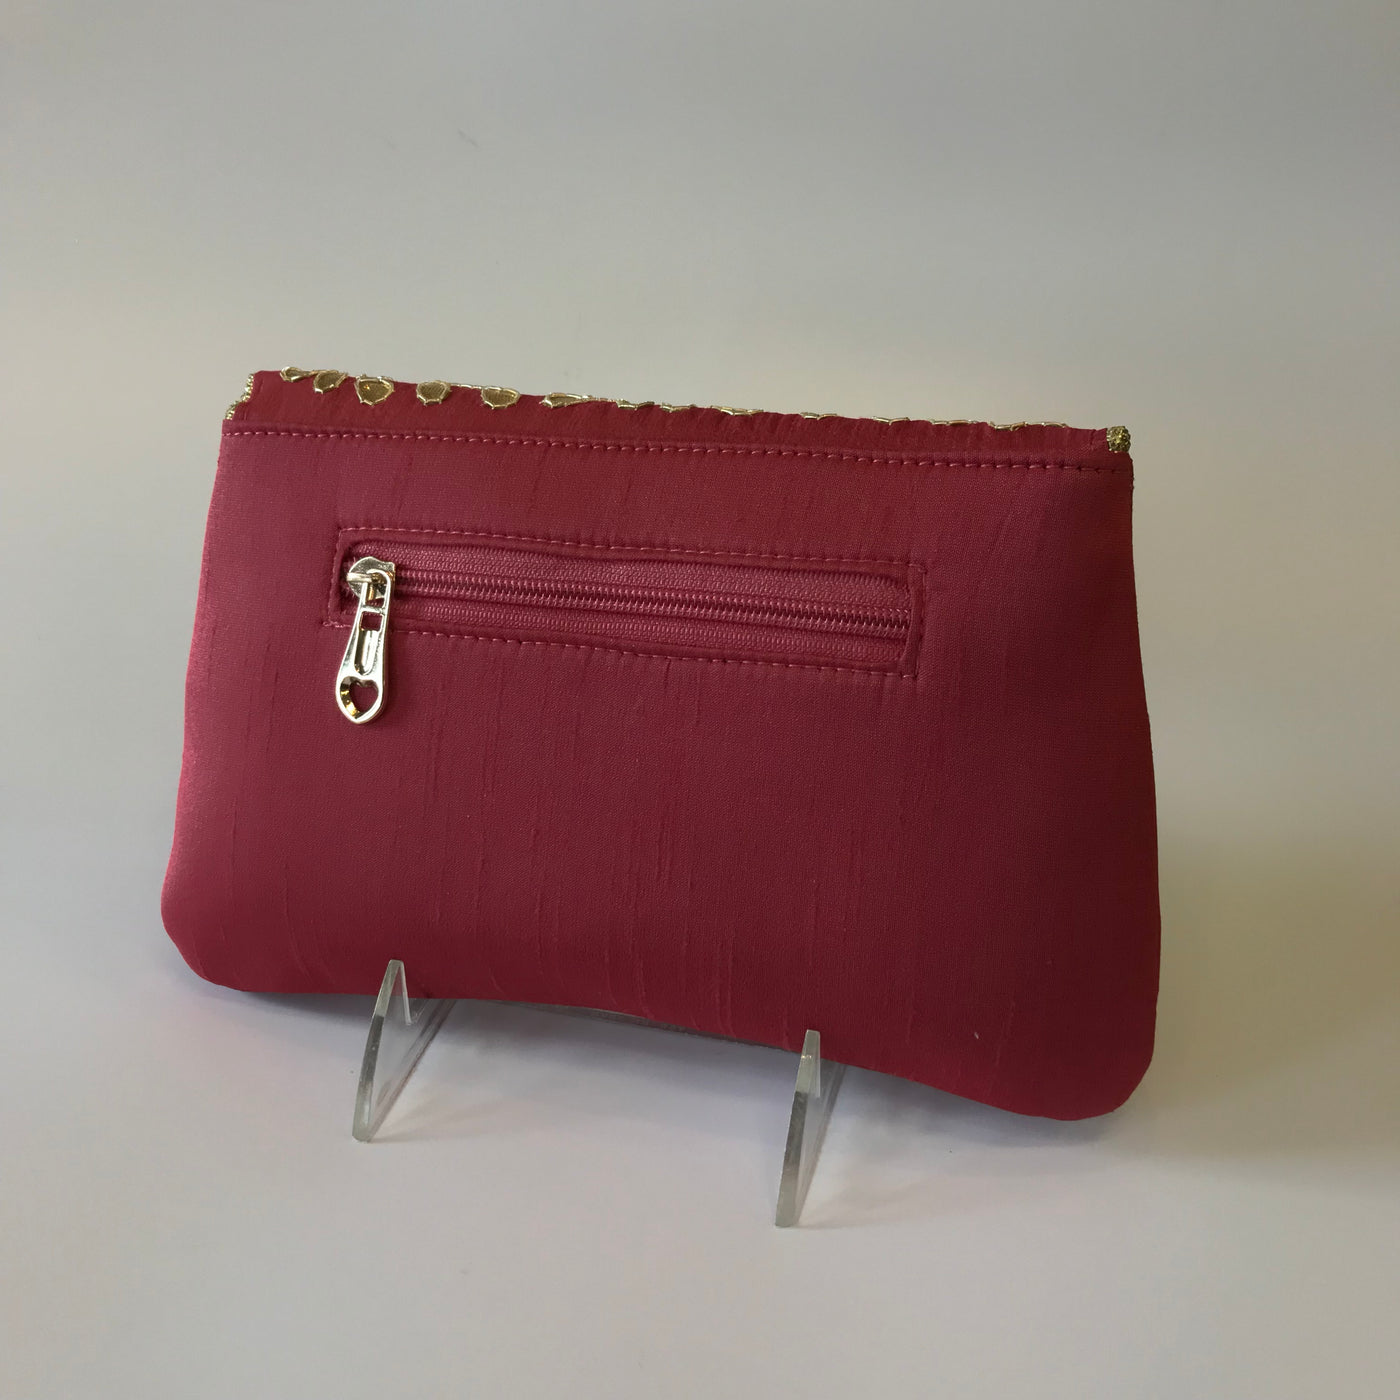 omen's Natural Leather Maroon Colour Beautiful Clutch Bag With Crystal  Handle Purse For Casual, Party, Wedding